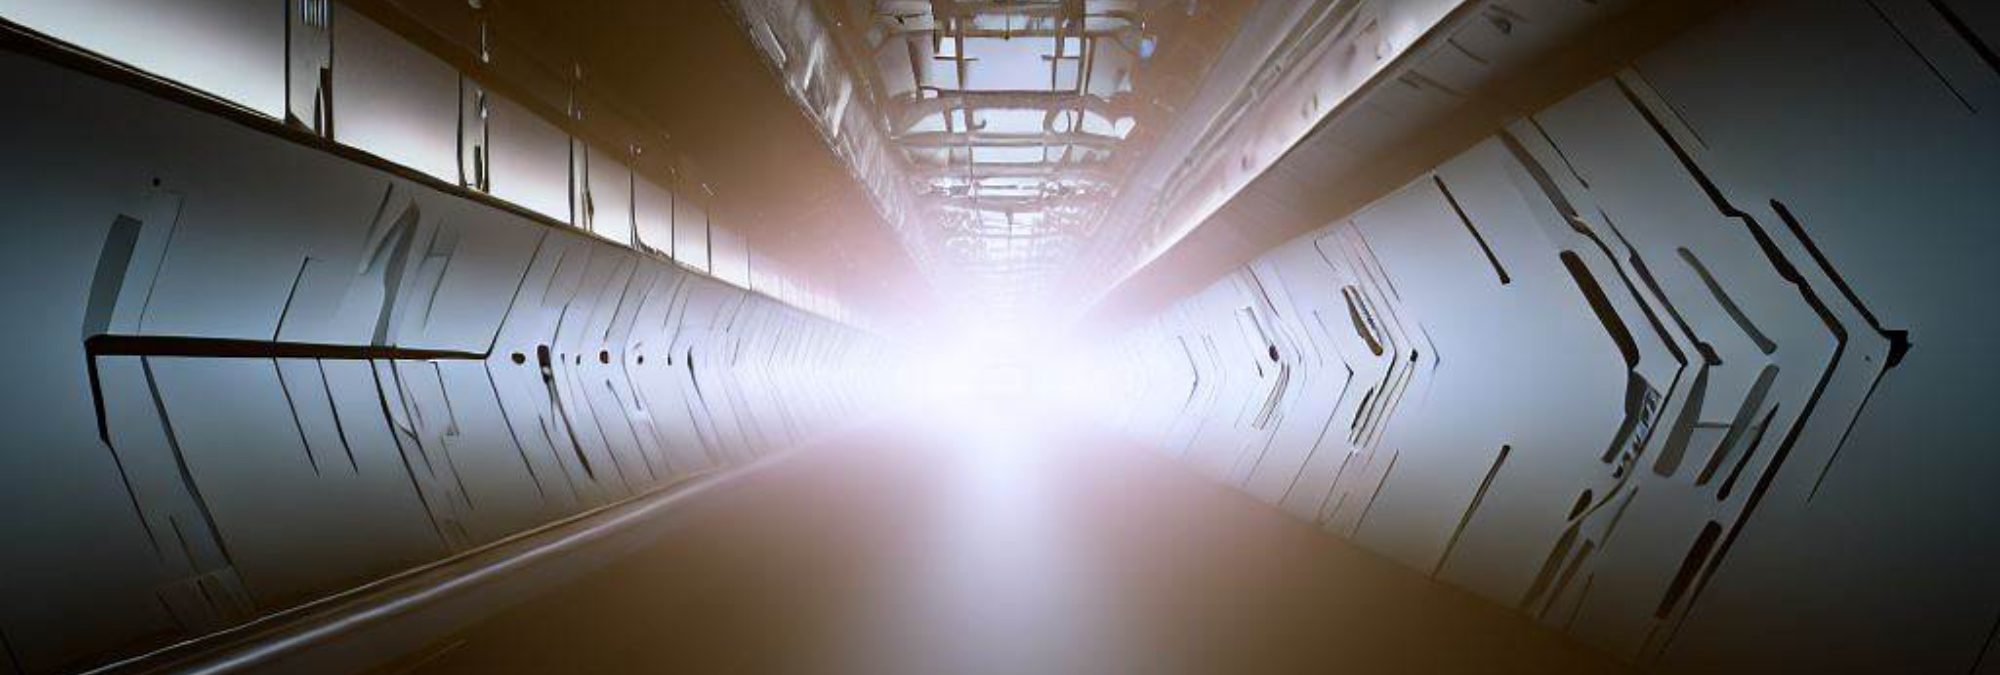 Tunnel Vision: CloudflareD AbuseD in the WilD – Source: securityboulevard.com